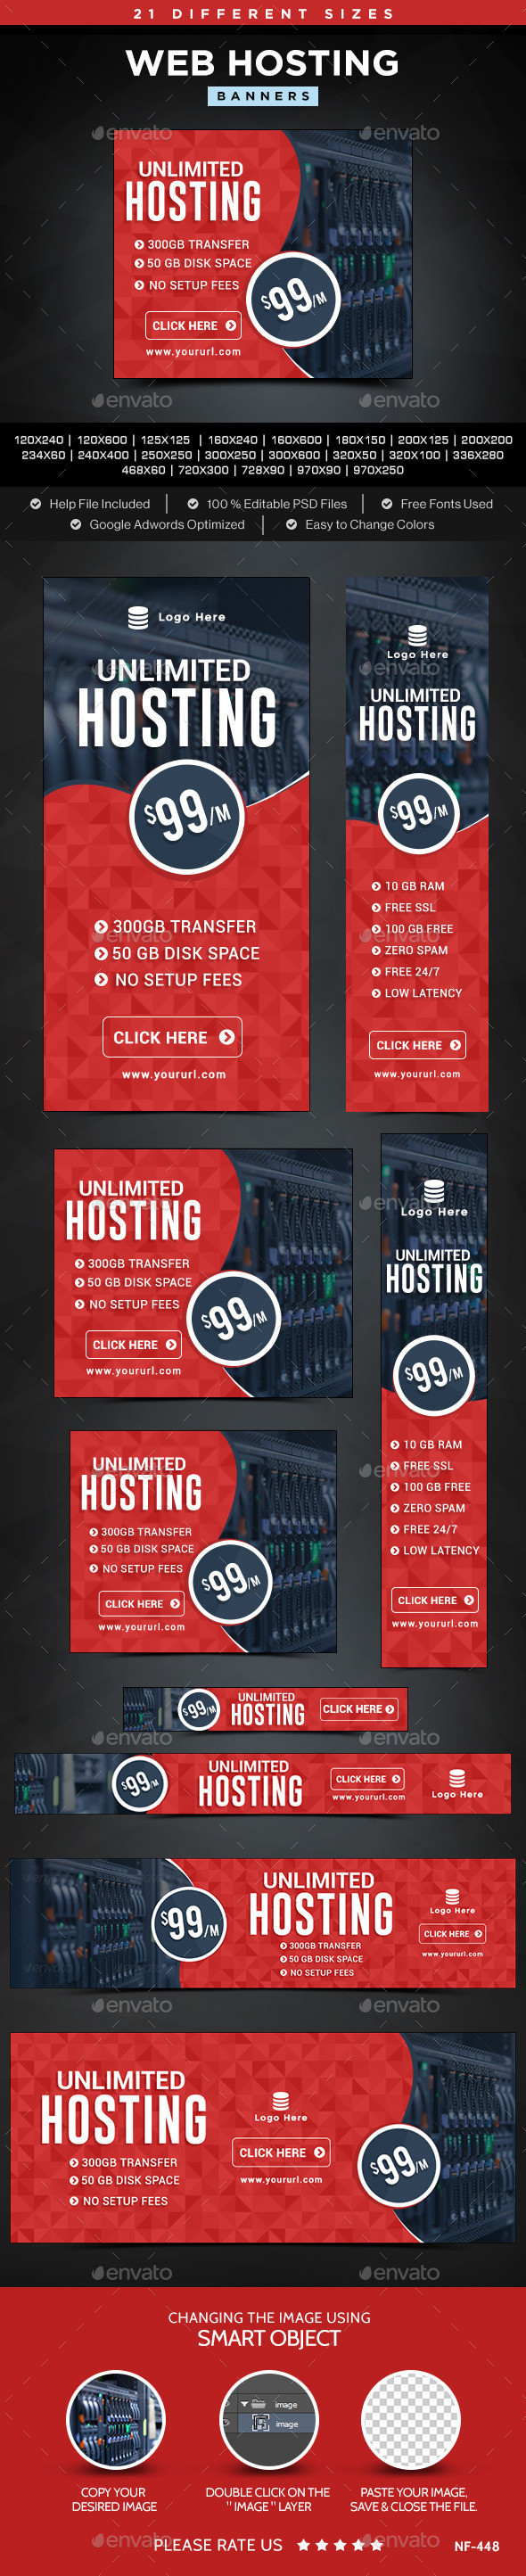 Nf 448 web 20hosting 20banners preview